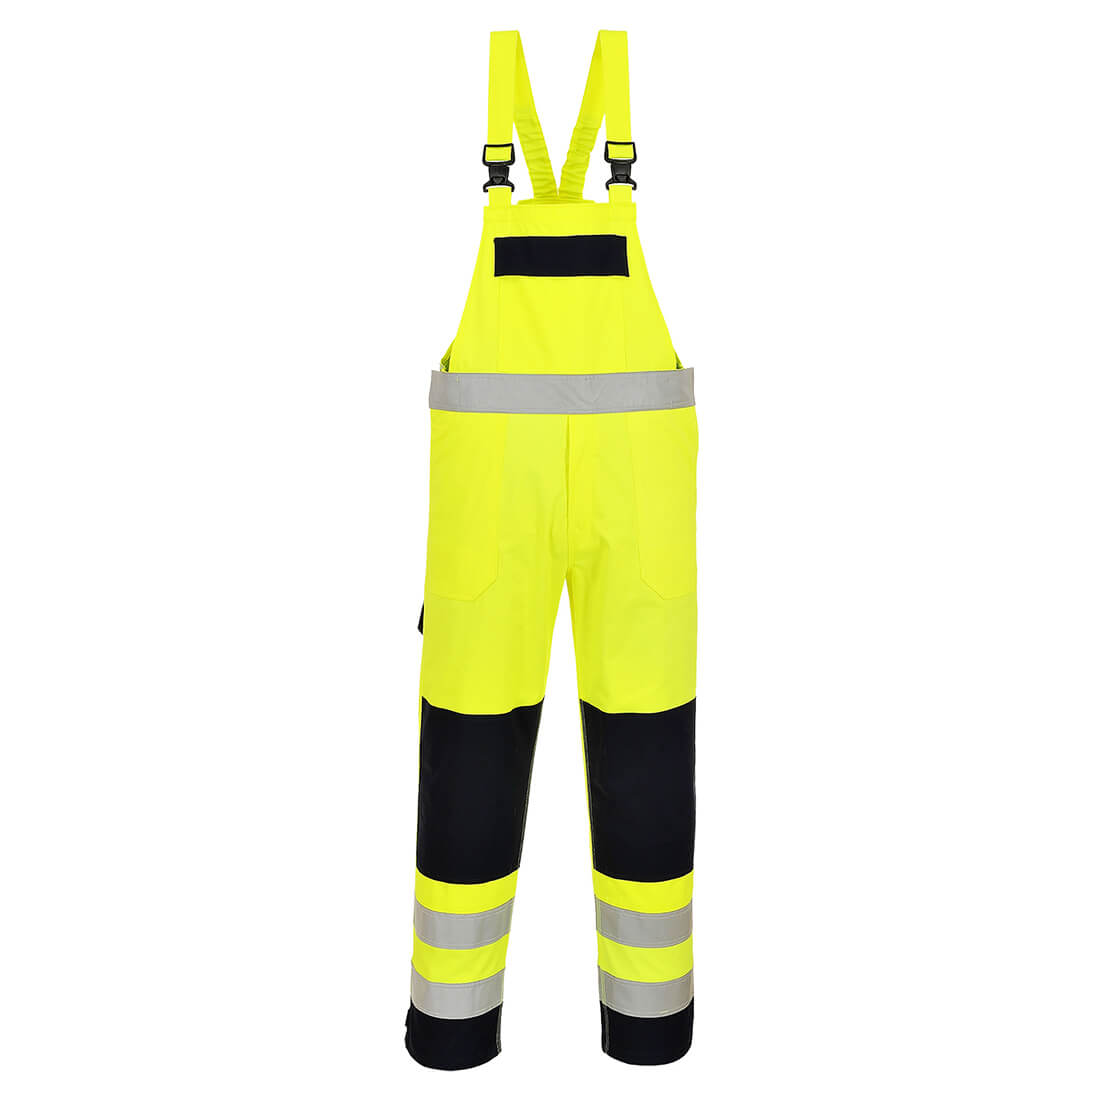 Image of Biz Flame Hi Vis Multi-Norm Flame Resistant Bib and Brace Yellow / Navy 3XL